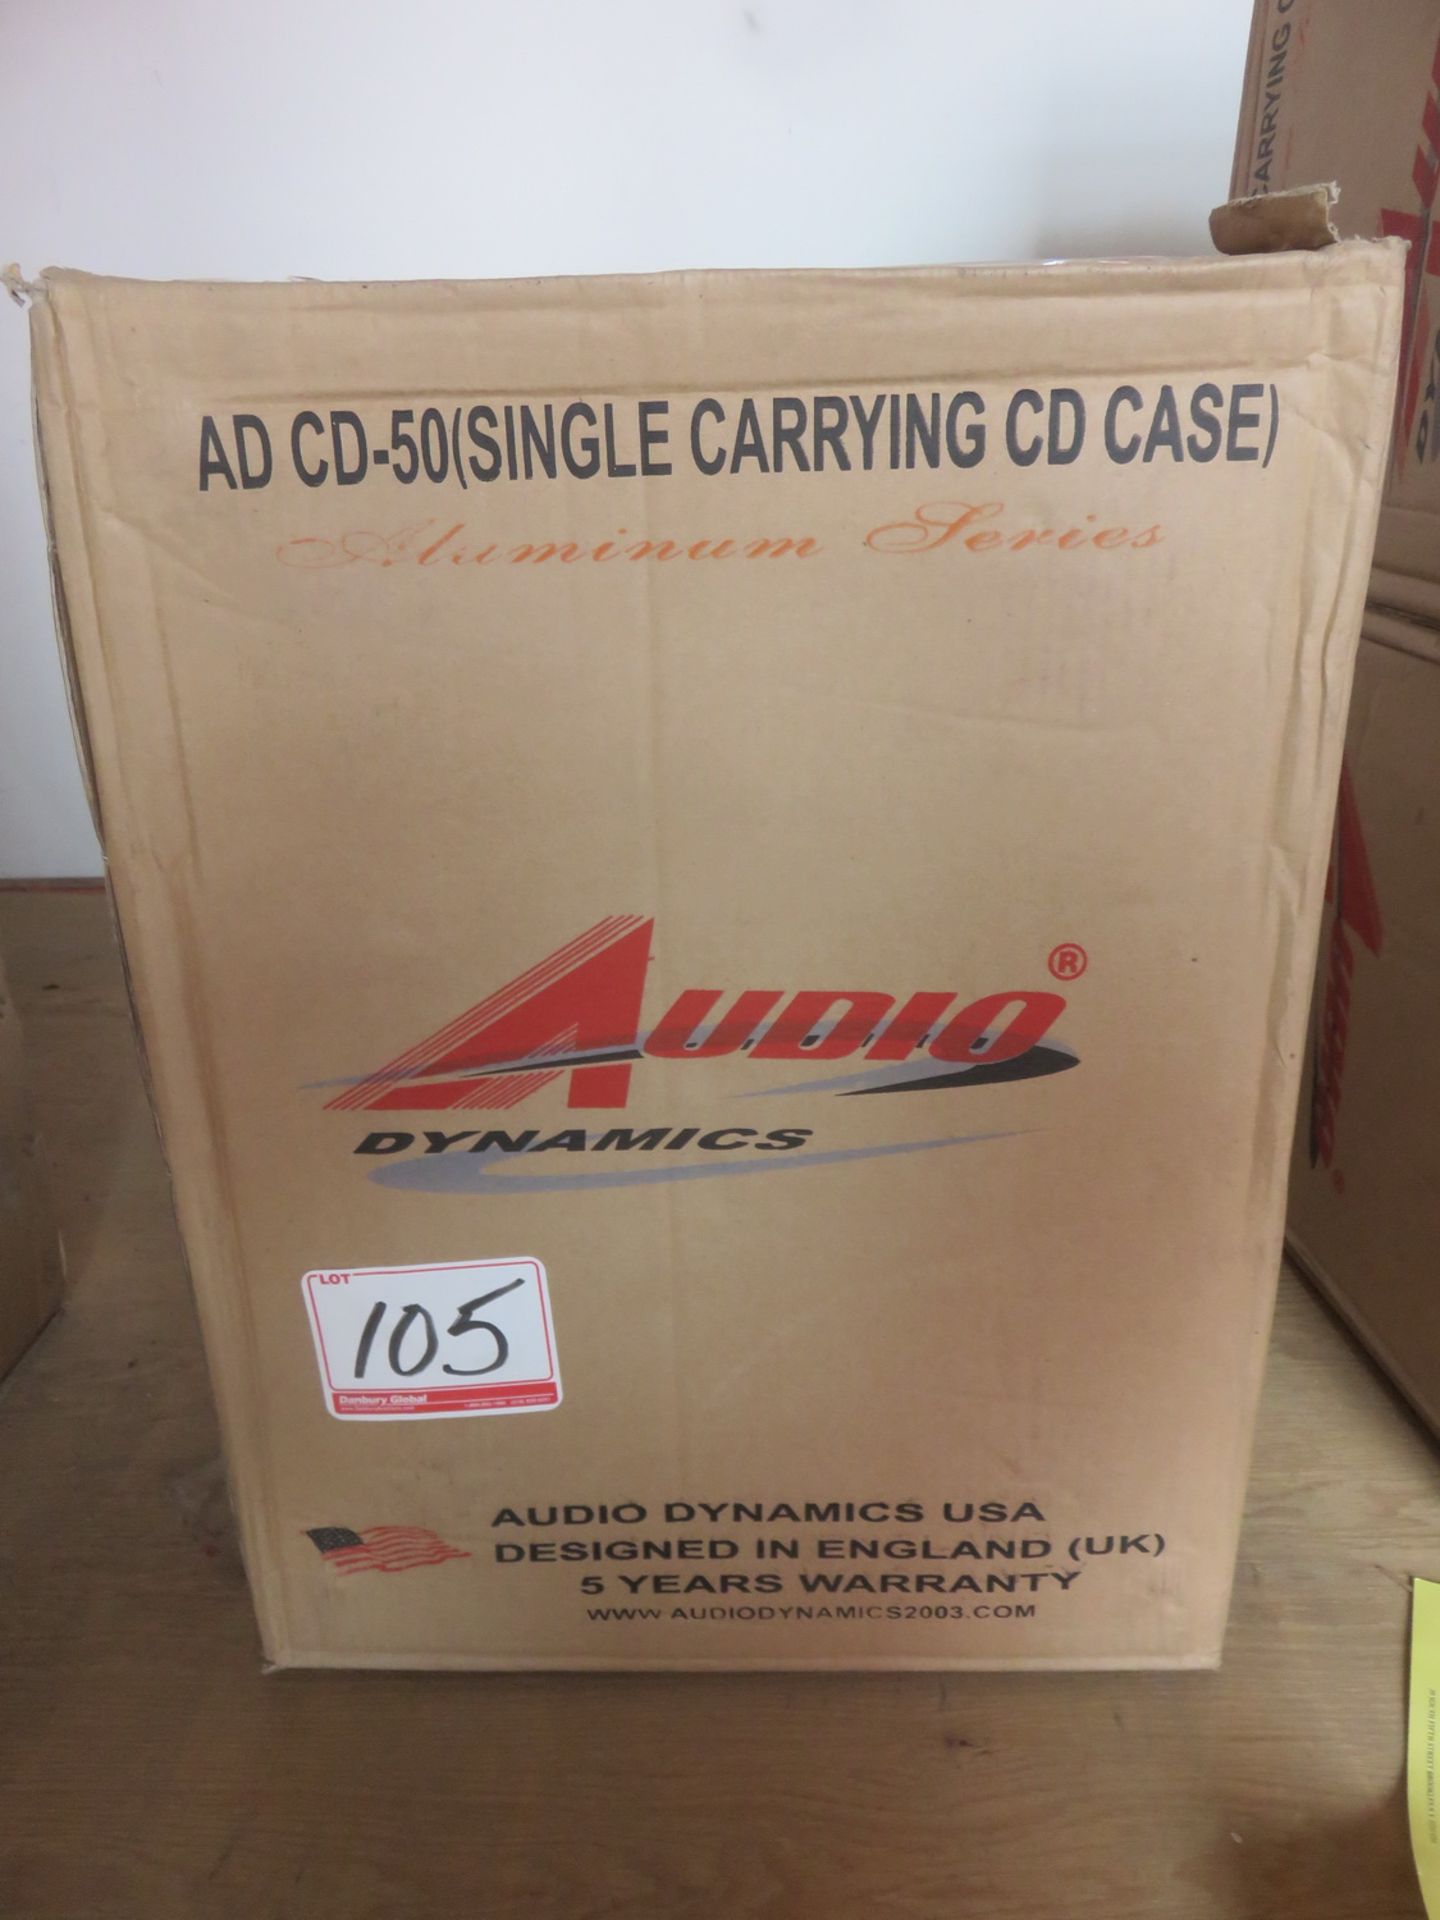 UNITS - AUDIO DYNAMICS MOD CD-50 BLACK SINGLE CARRYING CASES 7.5 X 14.5 X 18" (IN BOXES) - Image 3 of 3